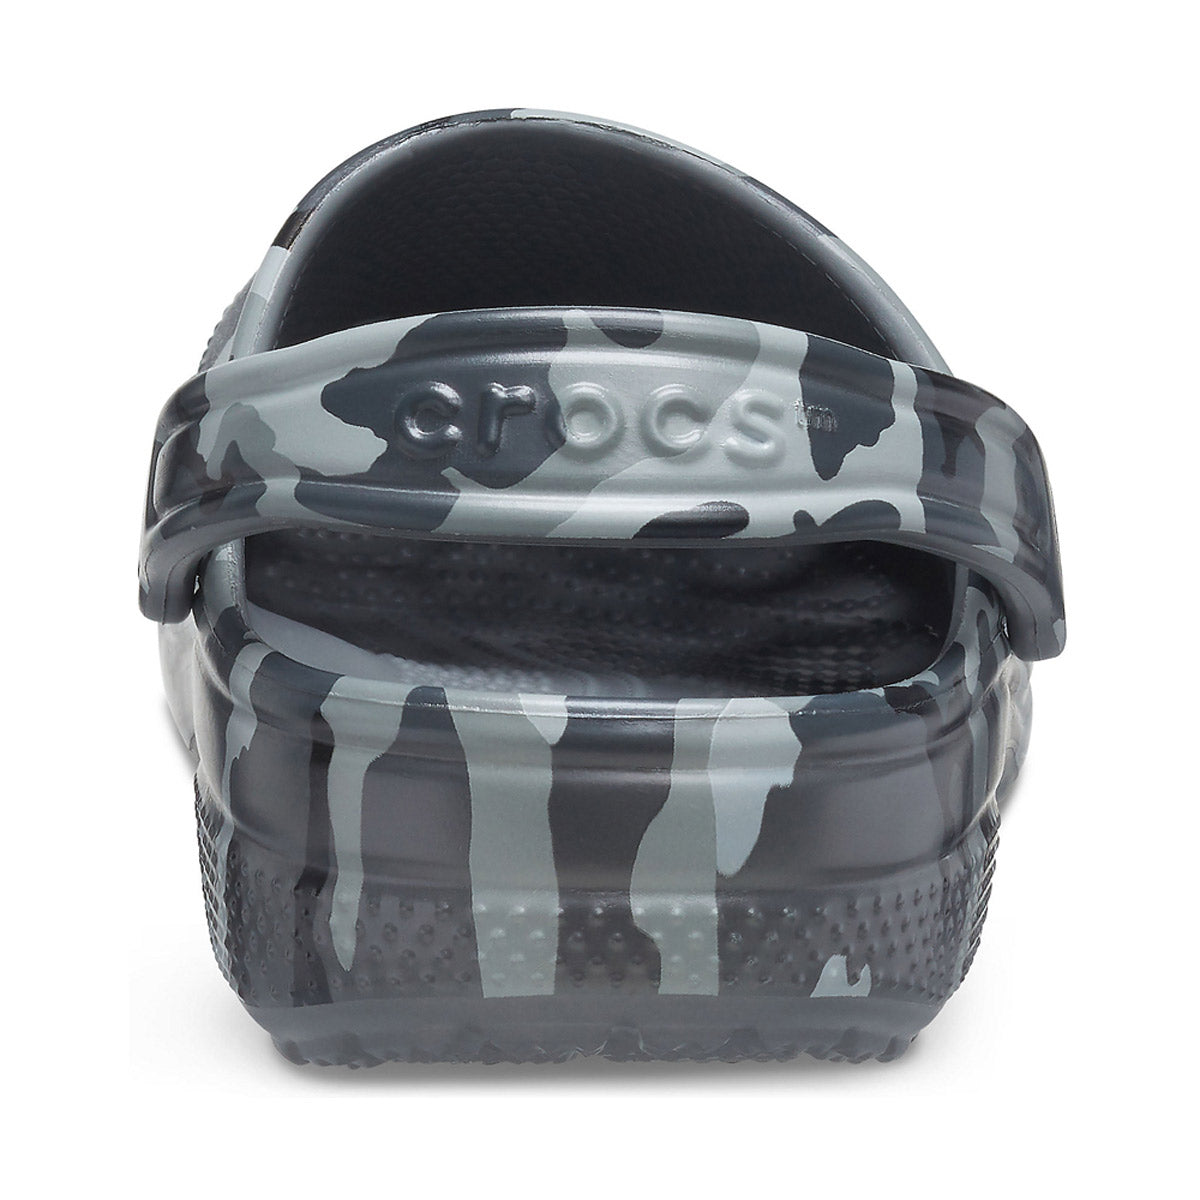 A single CROCS CLASSIC CAMO/SLATE GRAY - MENS clog viewed from the heel angle, featuring Iconic Crocs Comfort with its Croslite material.